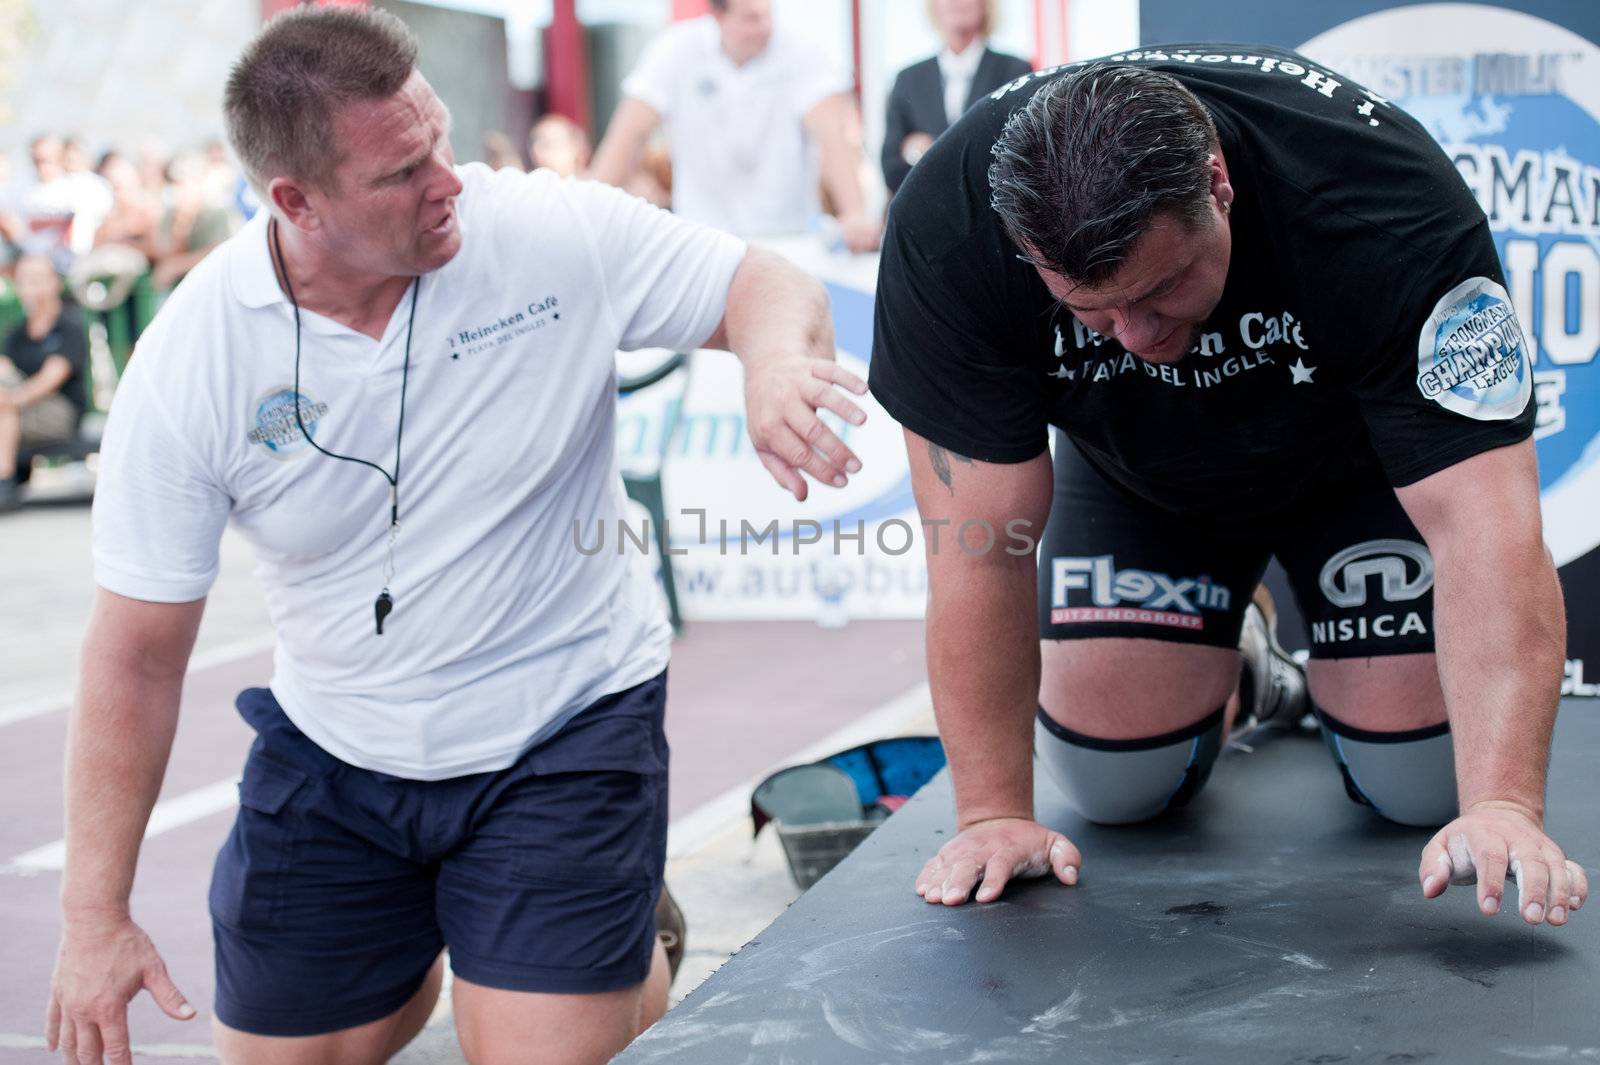 CANARY ISLANDS–SEPTEMBER 03:Arno Hams from Holland got injured during Strongman Champions League in Las Palmas September 03, 2011 in Canary Islands, Spain